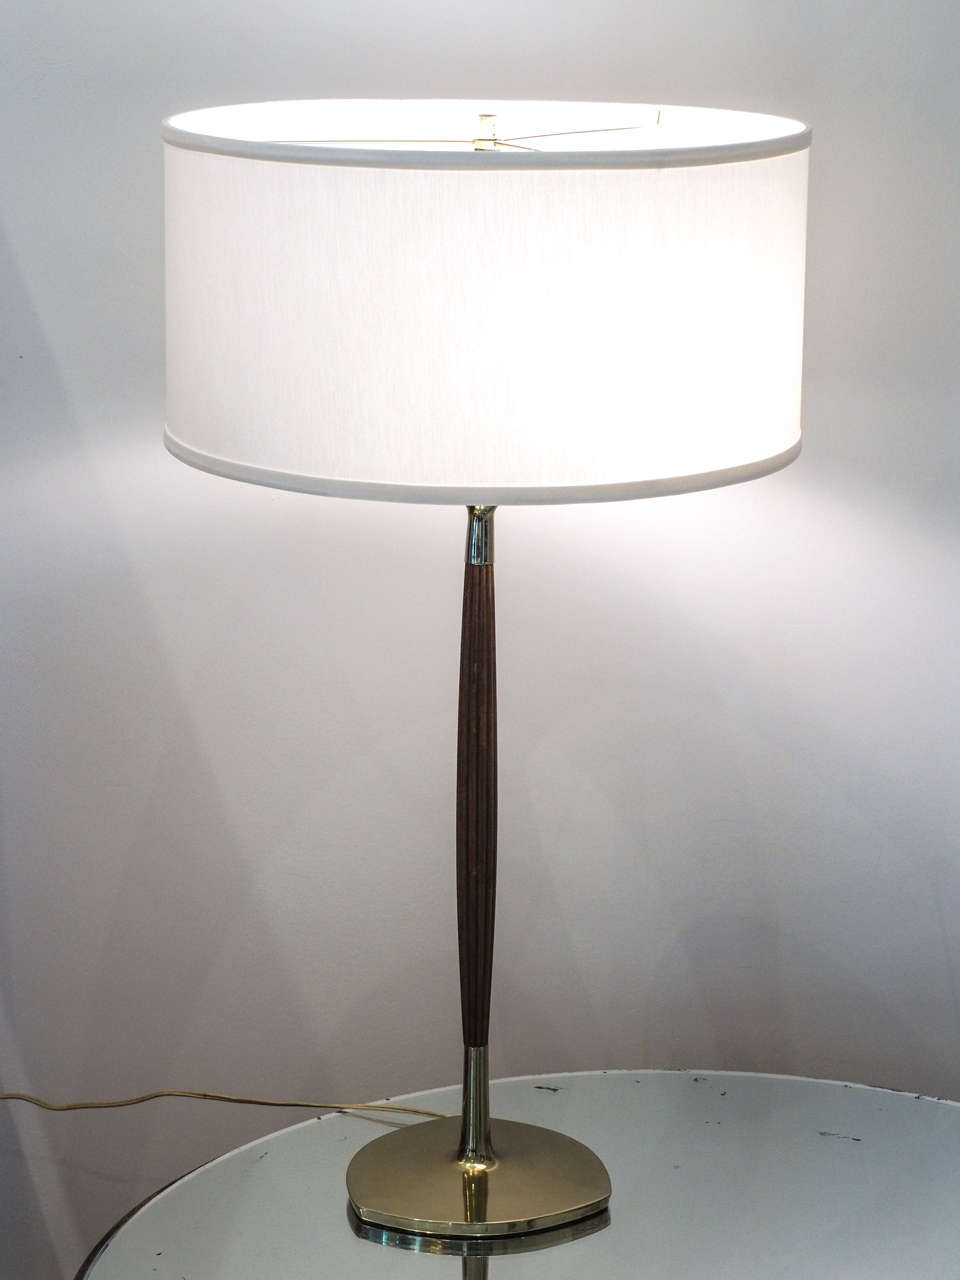 Attractive attenuated three-light table lamp in walnut and brass with ivory silk shade; paper Laurel label on one socket; white painted metal diffusor below the light sources; triangular brass base with rounded sides